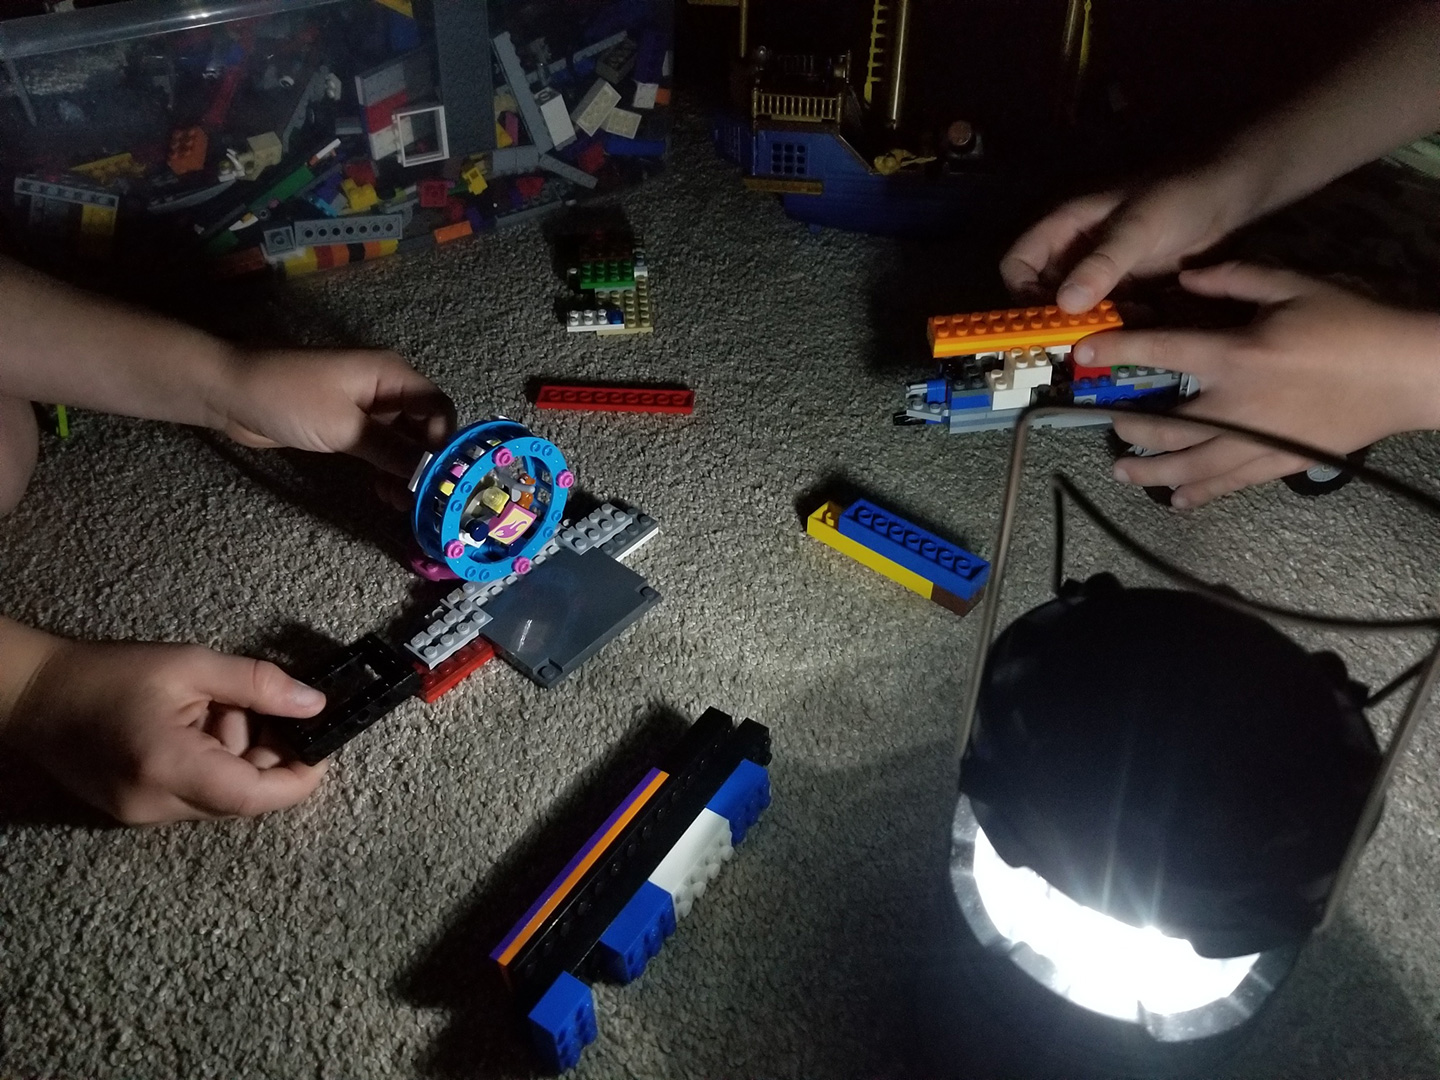 Kids and legos